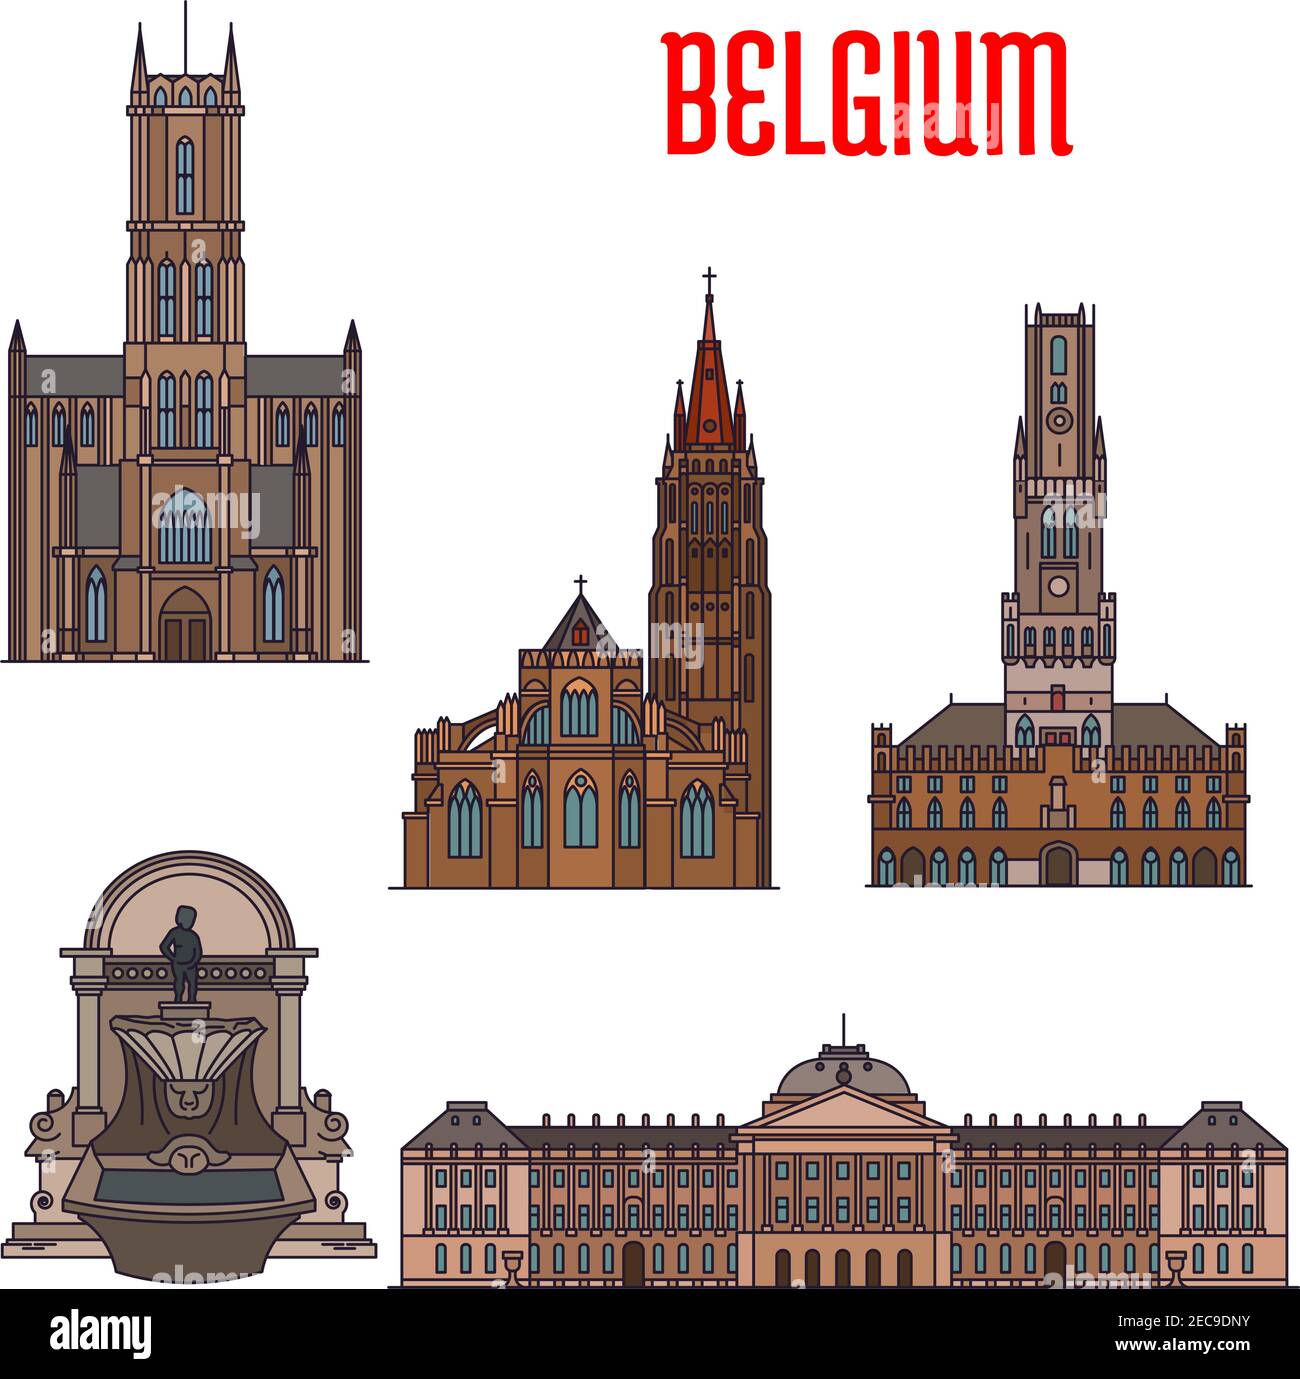 Famous historic buildings and landmarks of Belgium. Detailed icons of Manneken Pis, Royal Palace, Belfry of Bruges, Church of Our Lady, St Bavo Cathed Stock Vector